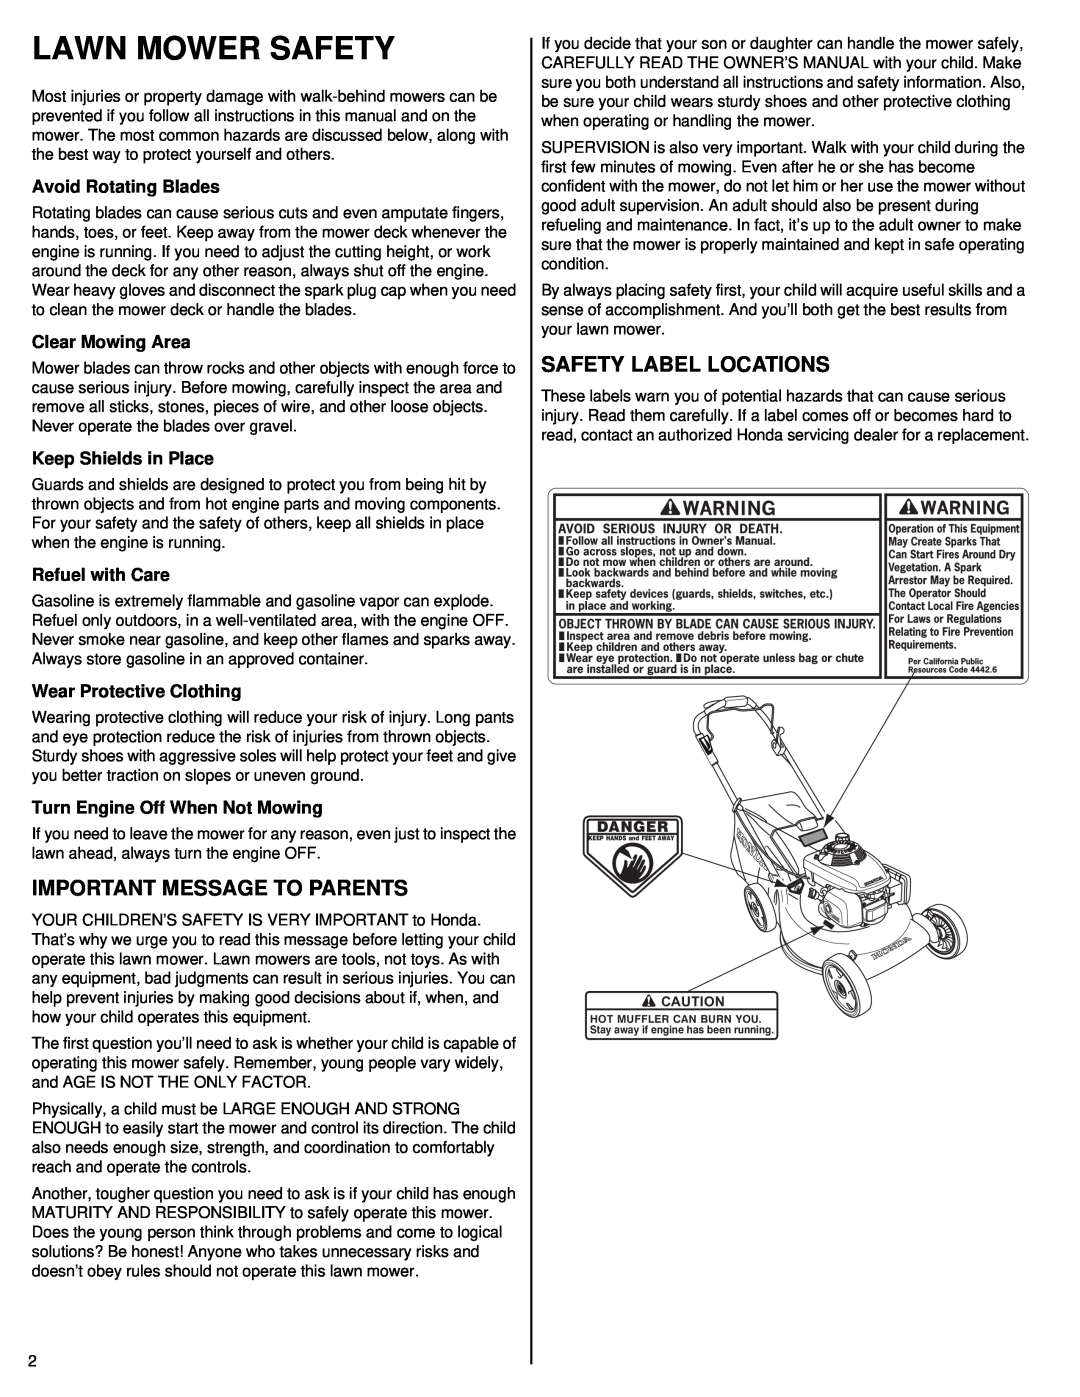 Honda Power Equipment HRR216VXA Lawn Mower Safety, Important Message To Parents, Safety Label Locations, Clear Mowing Area 